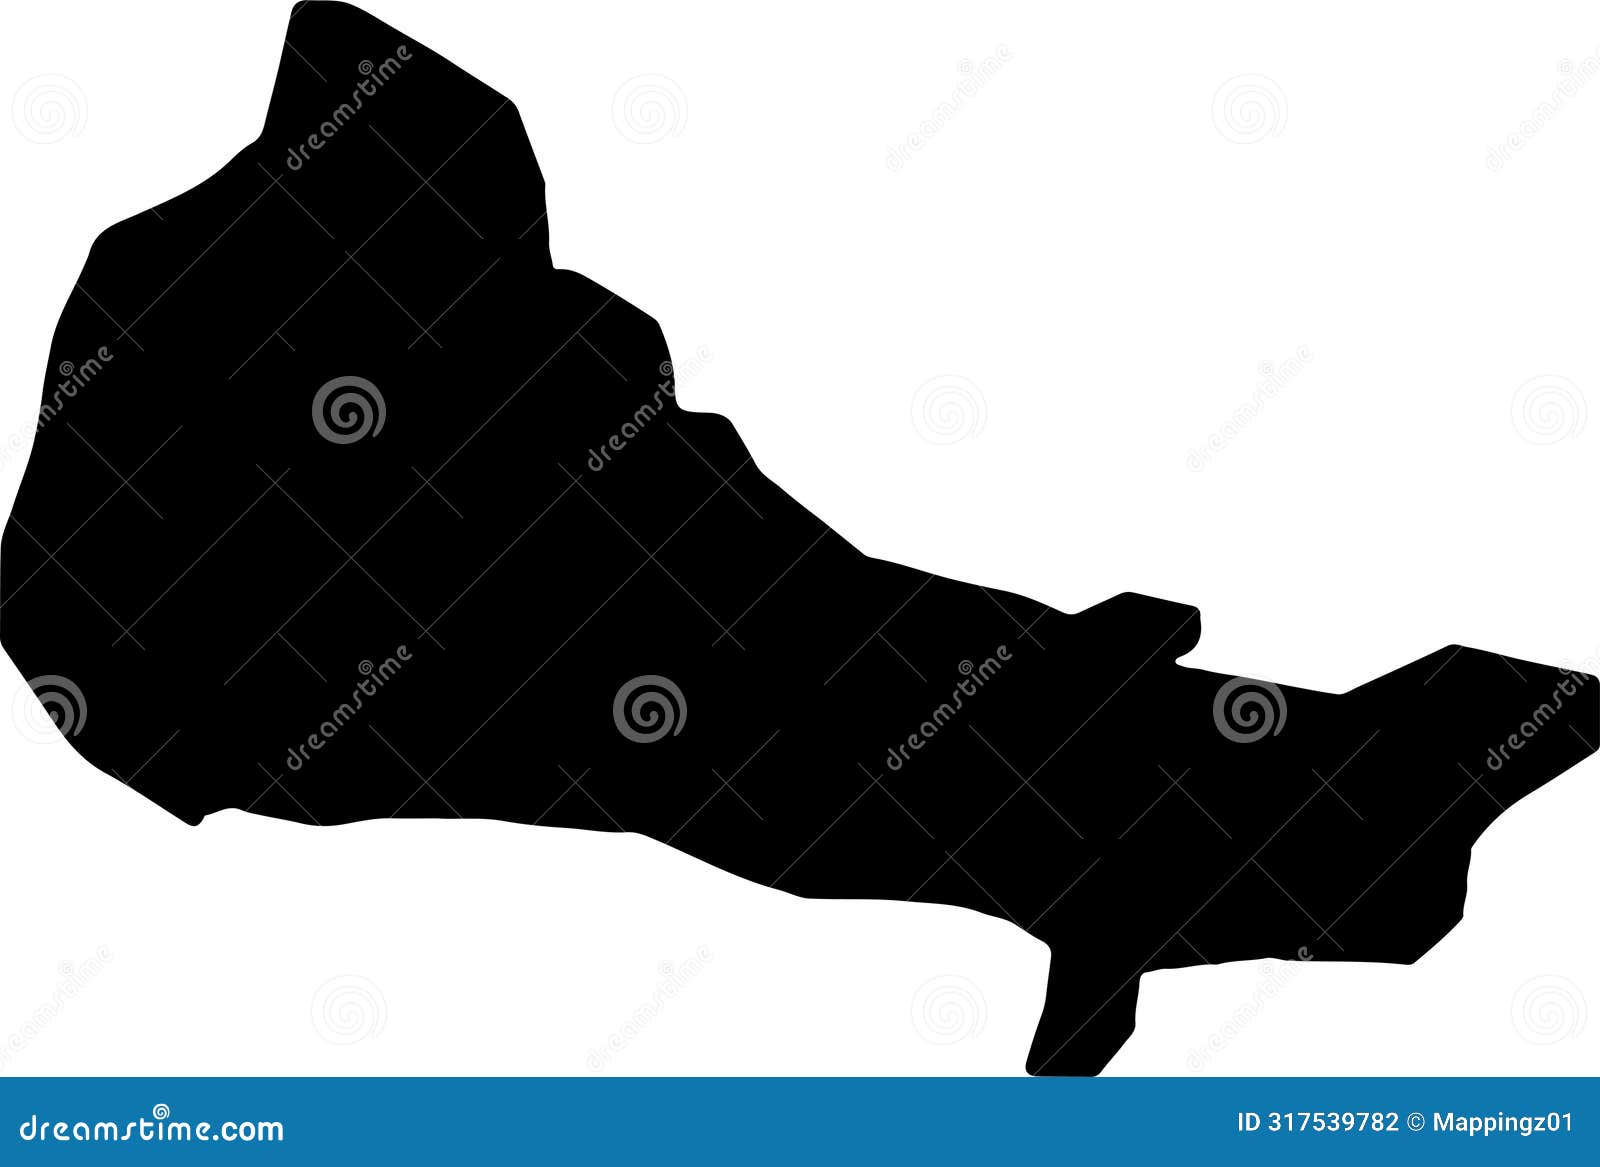 duarte dominican republic silhouette map with transparent background